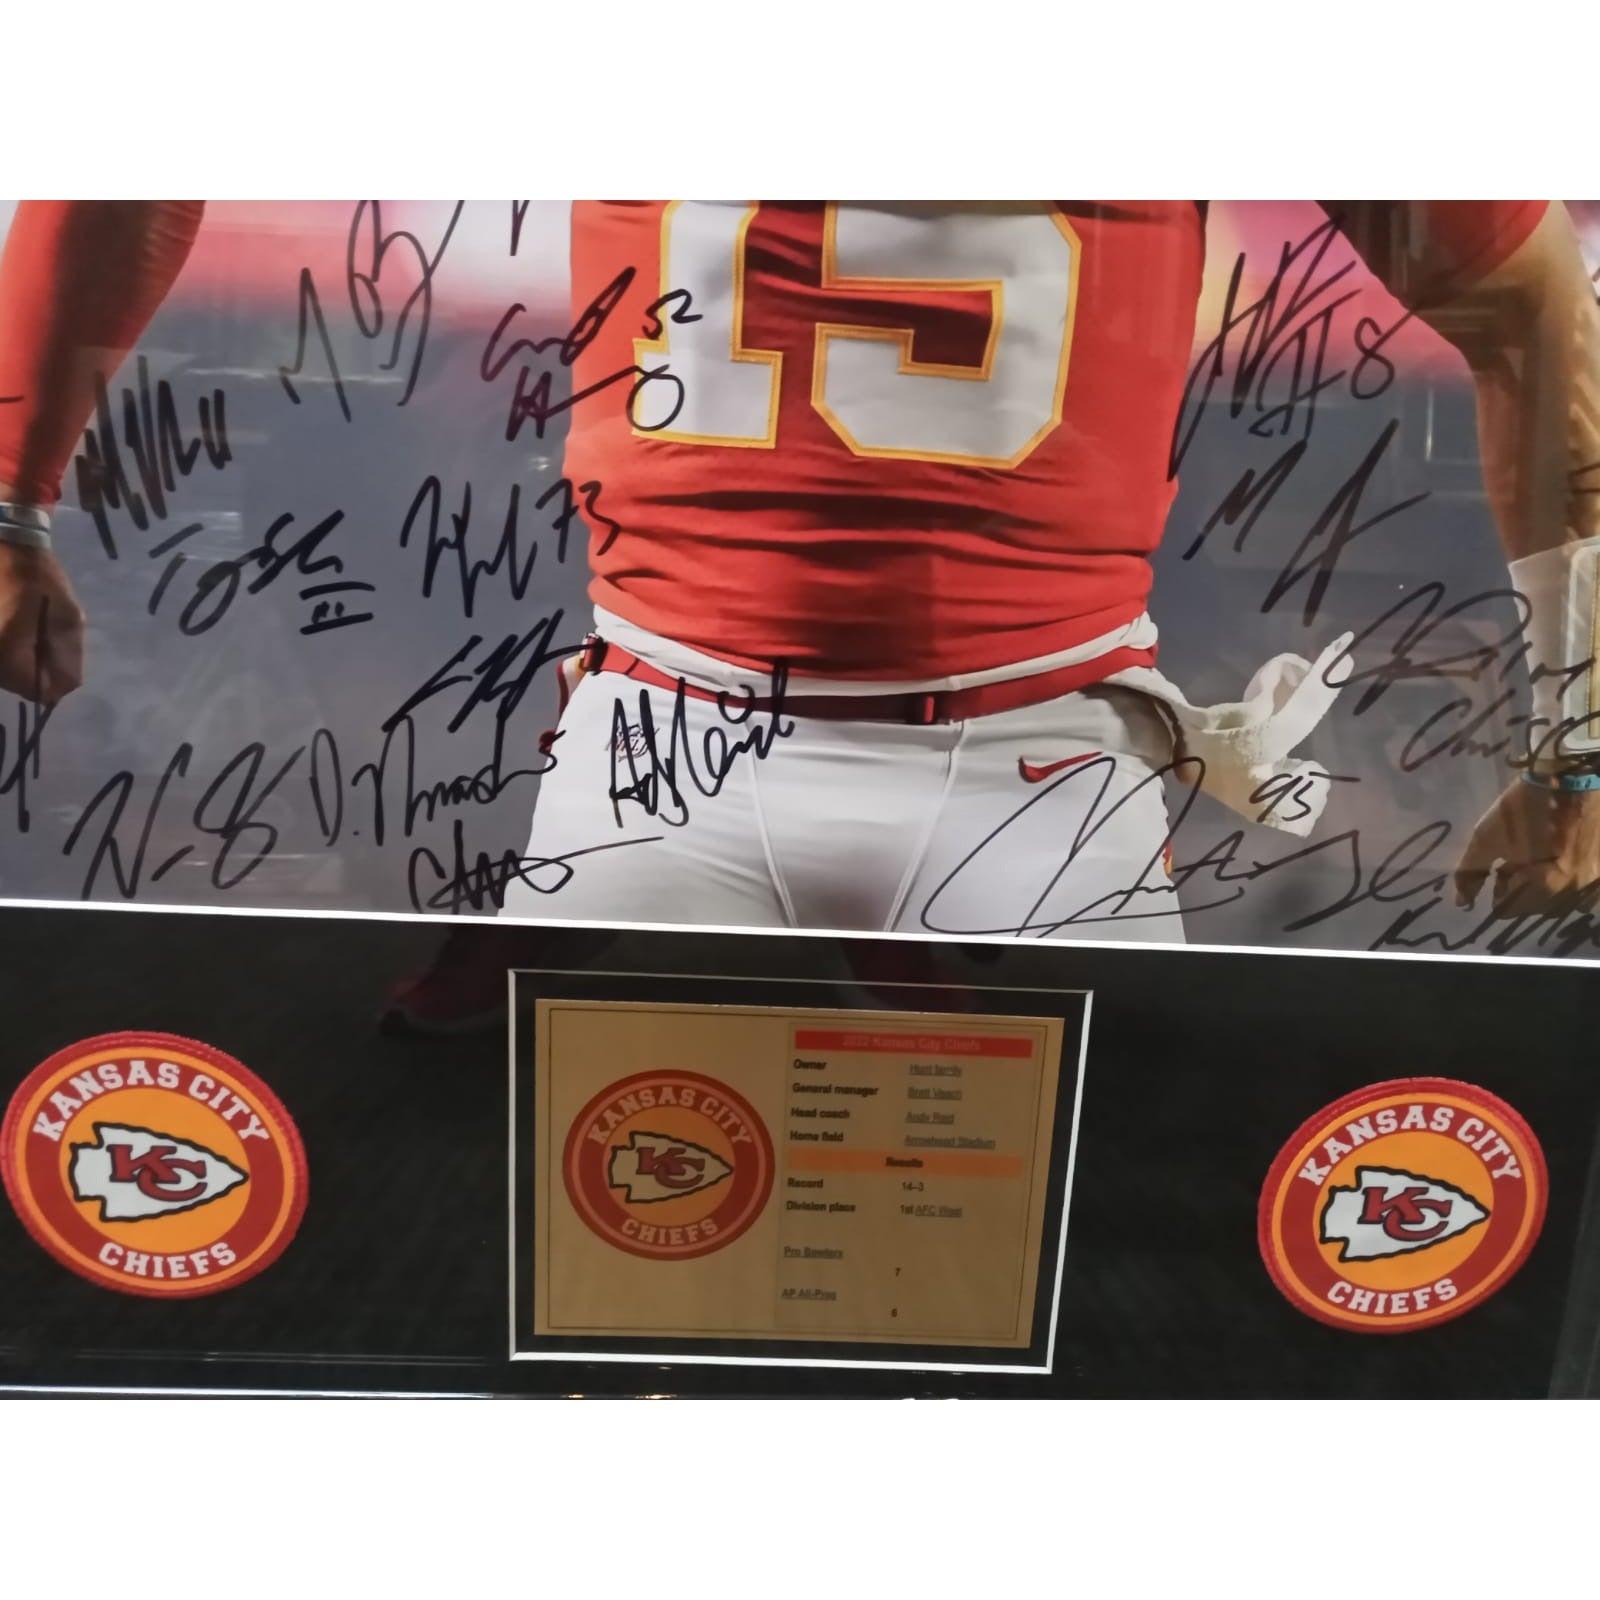 Patrick Mahomes Andy Reid 2022 Kansas City Chiefs framed team signed 16x20 photo signed with proof